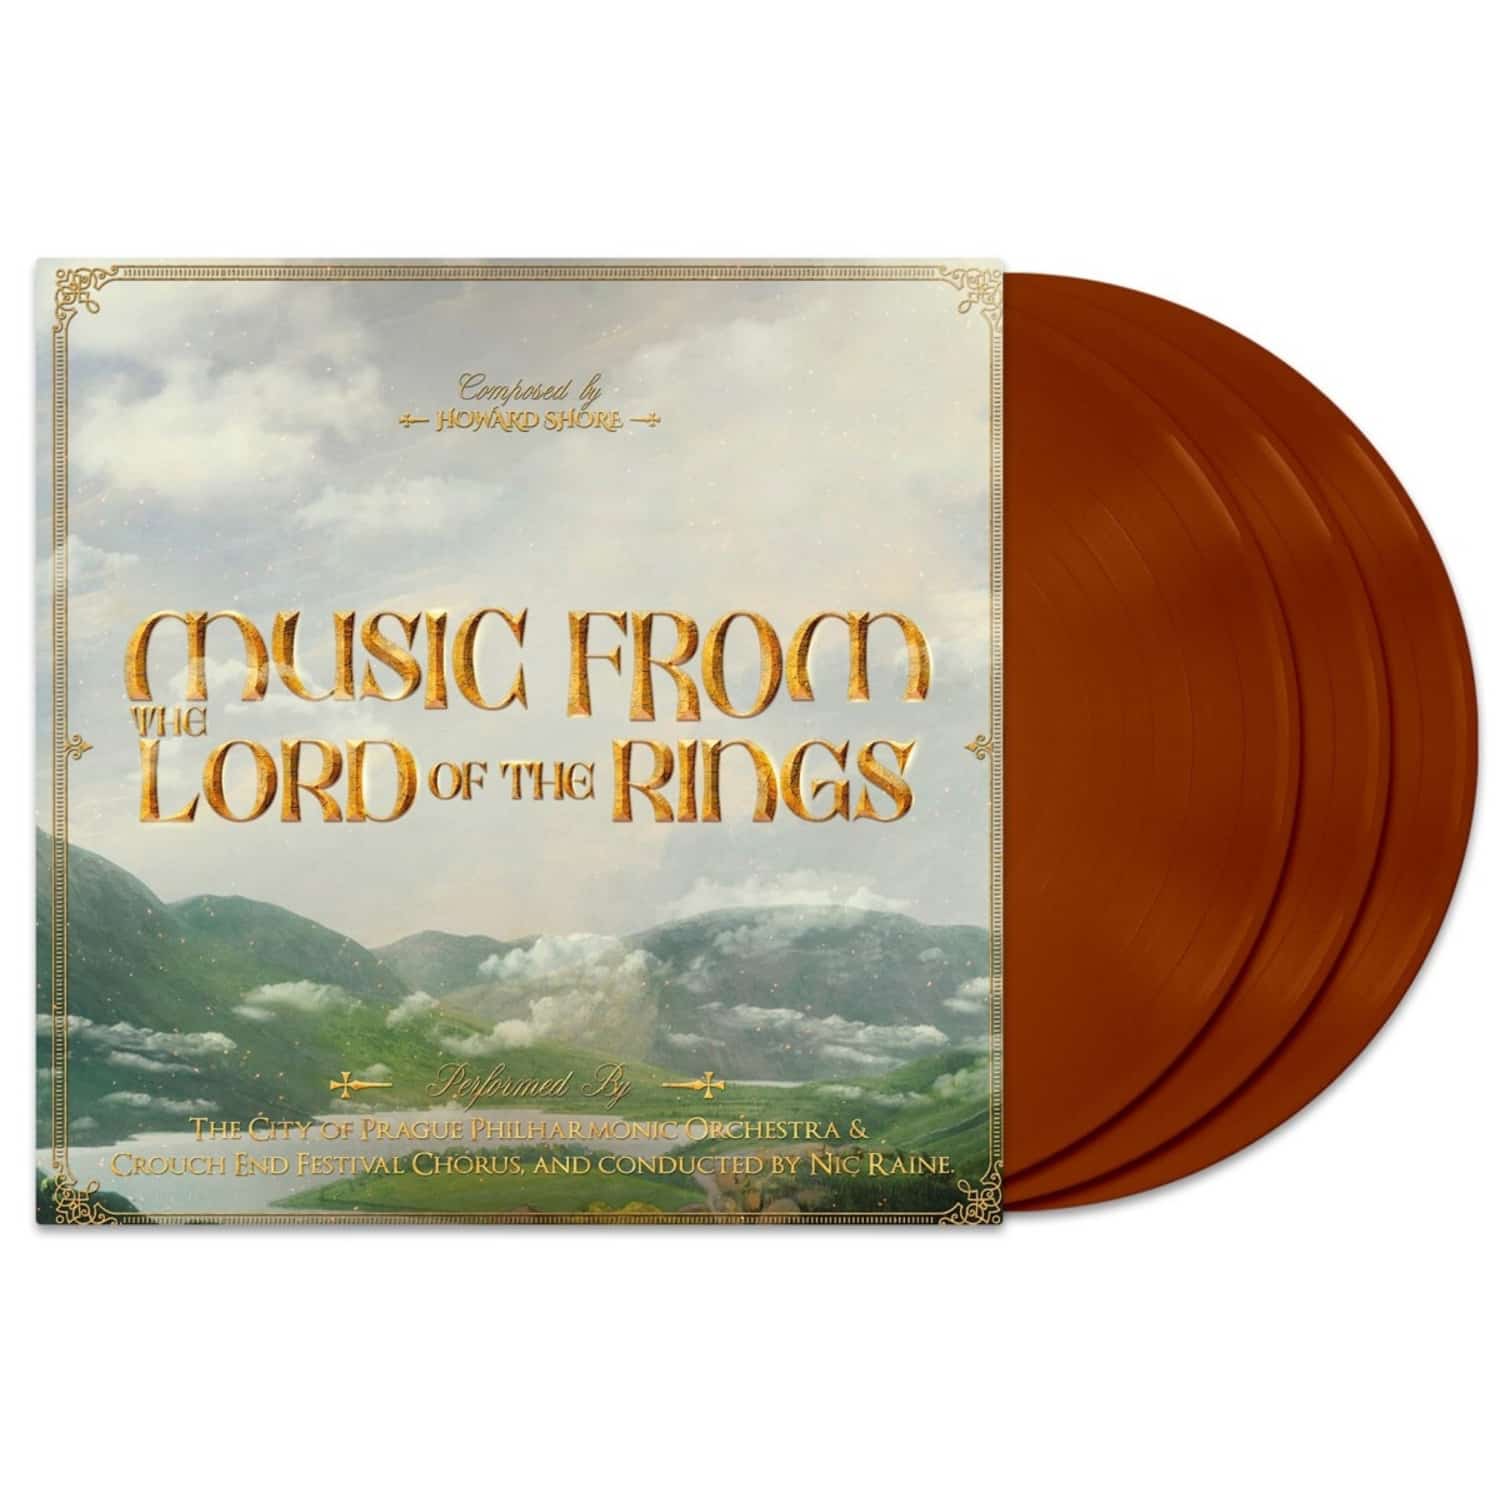 The City Of Prague Philharmonic Orchestra - MUSIC FROM THE LORD OF THE RINGS 